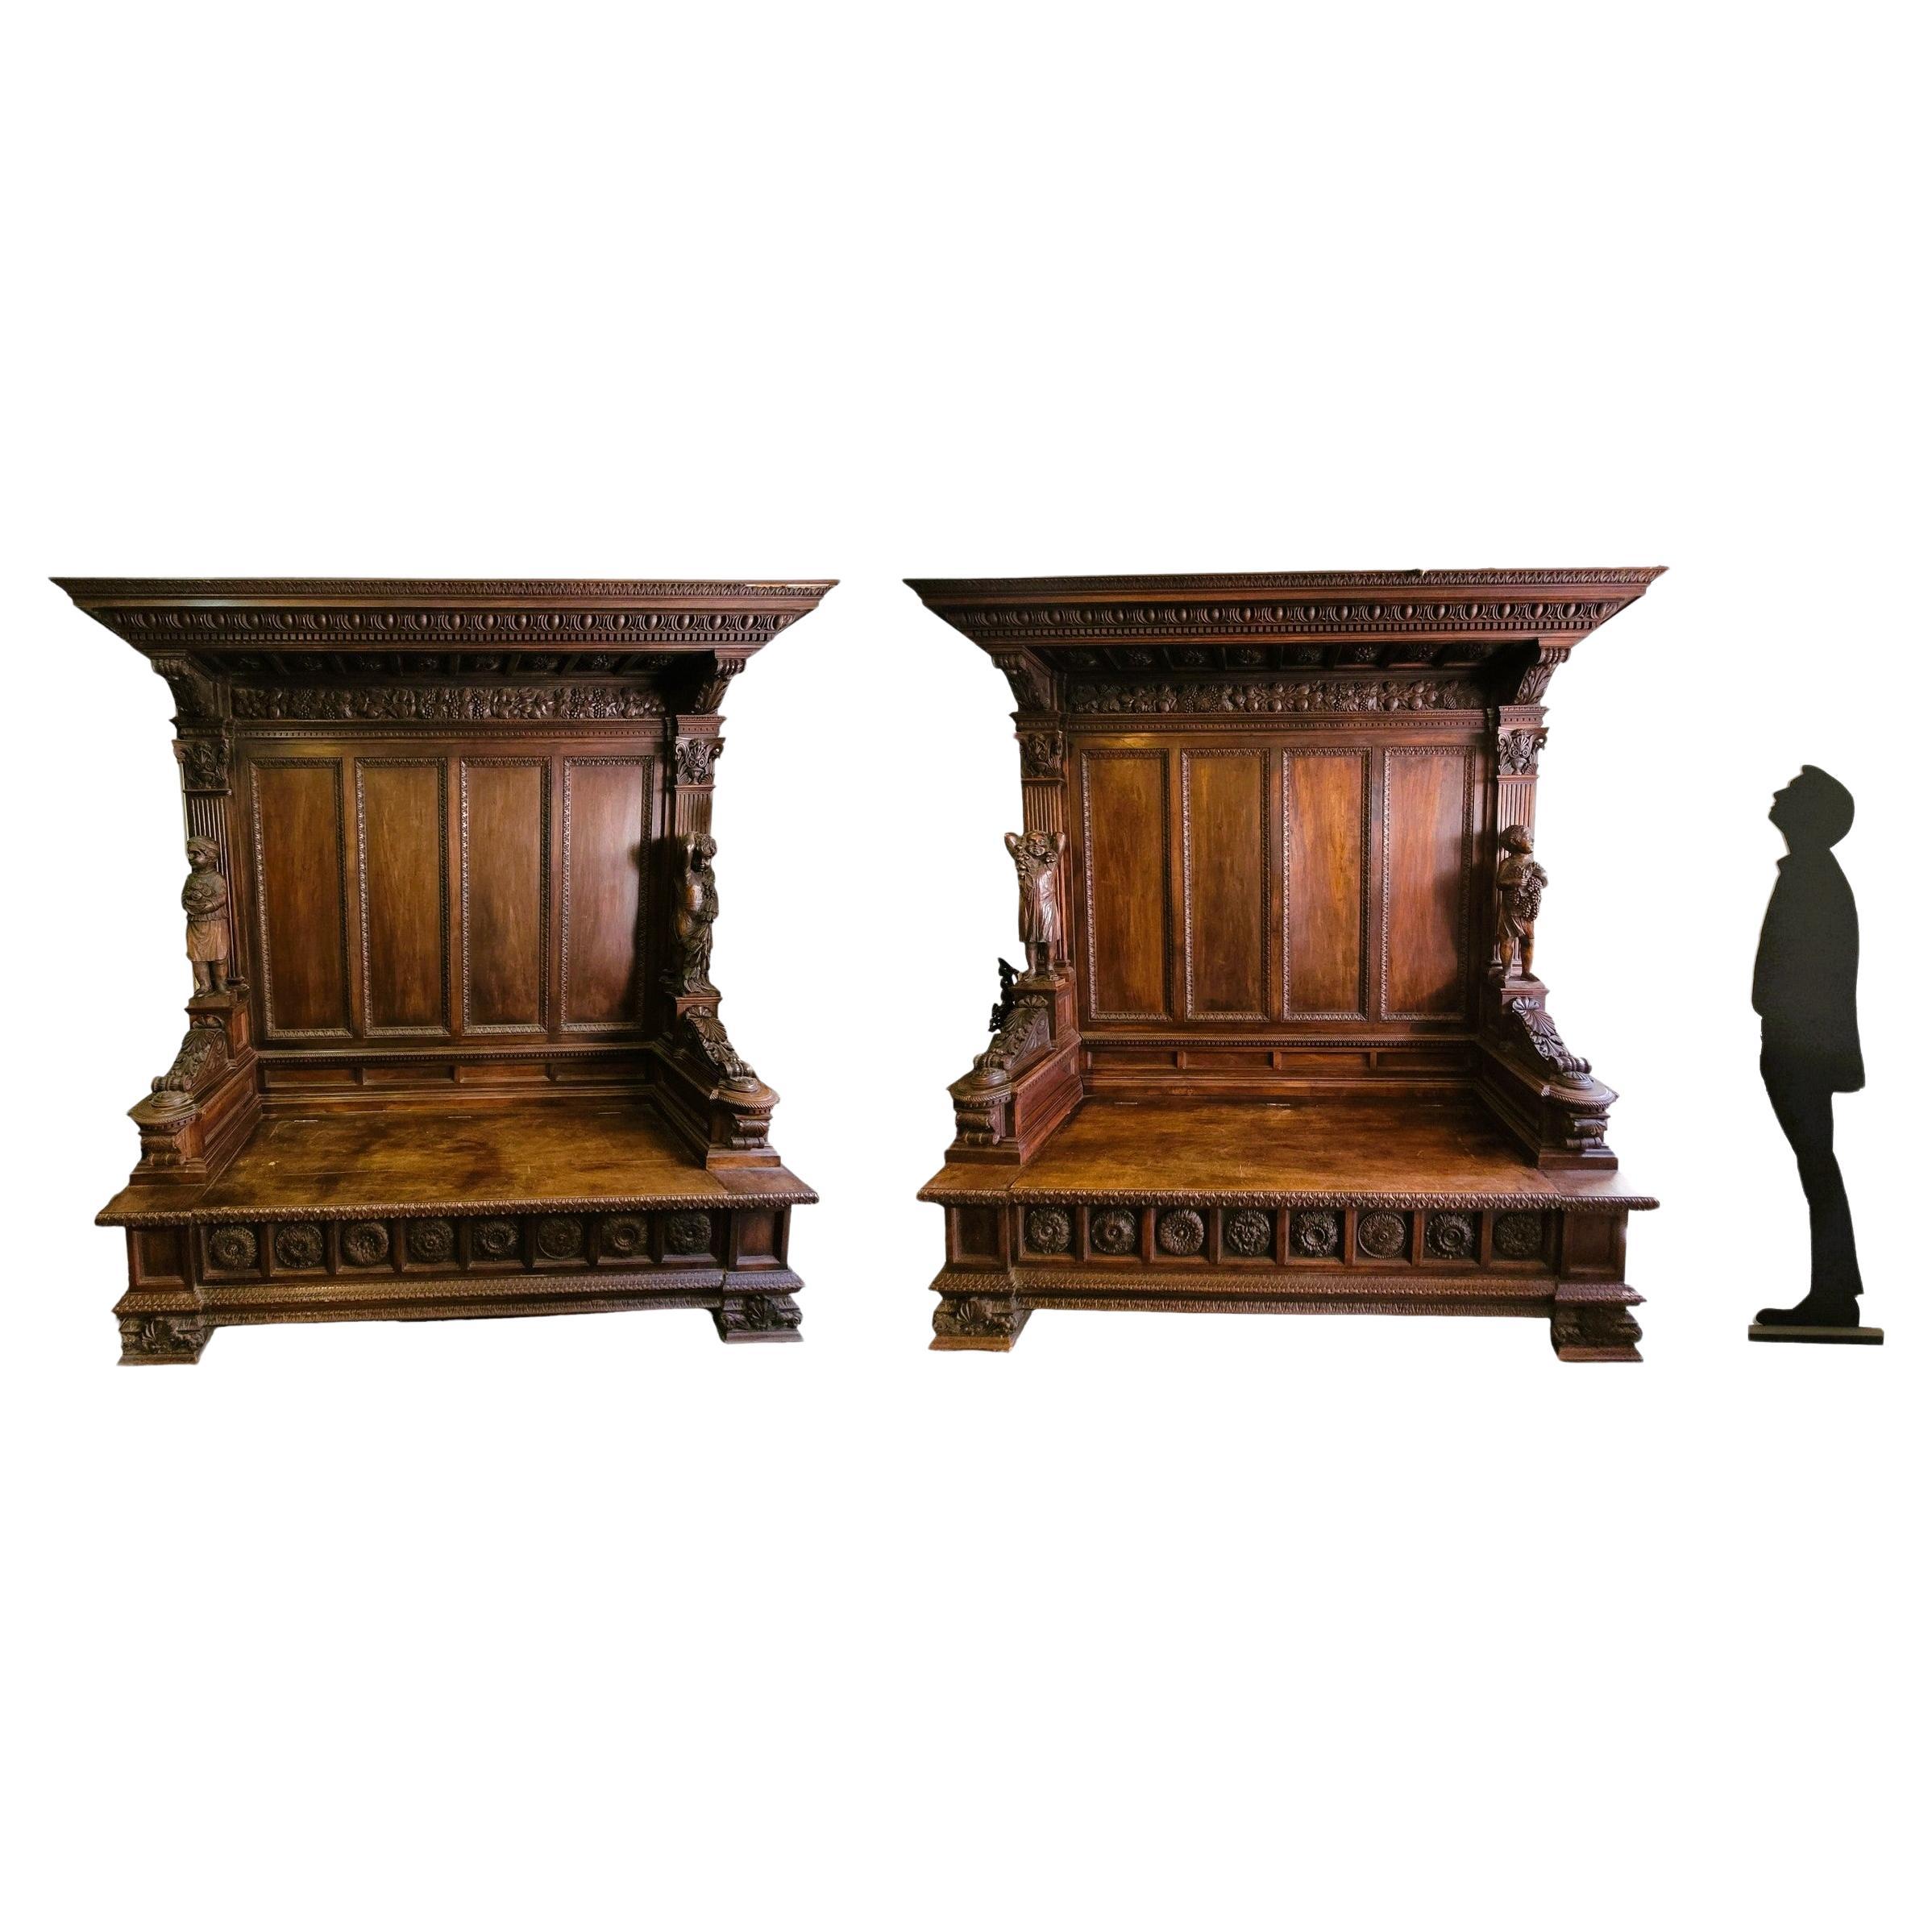 Cassapanca, Pair Of Important Carved Wood Benches, 19th Century